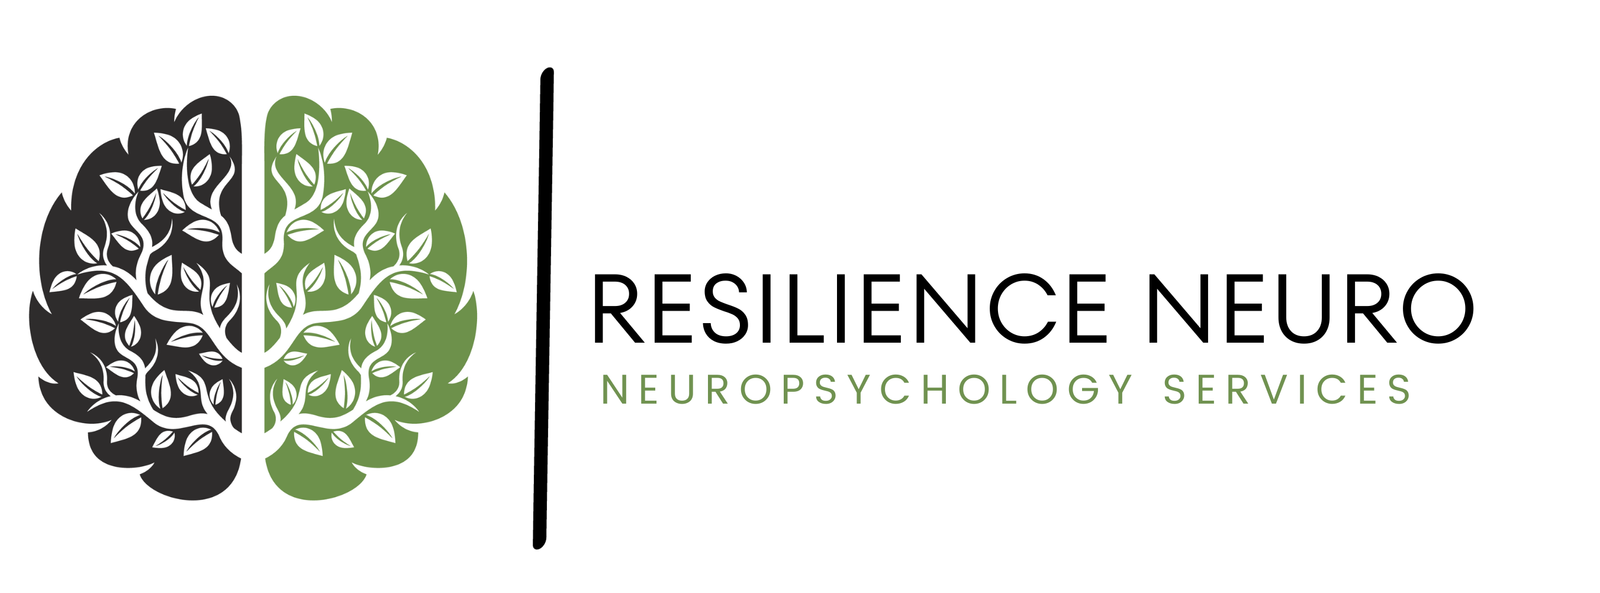 Resilience Neuro - Neuropsychological services London